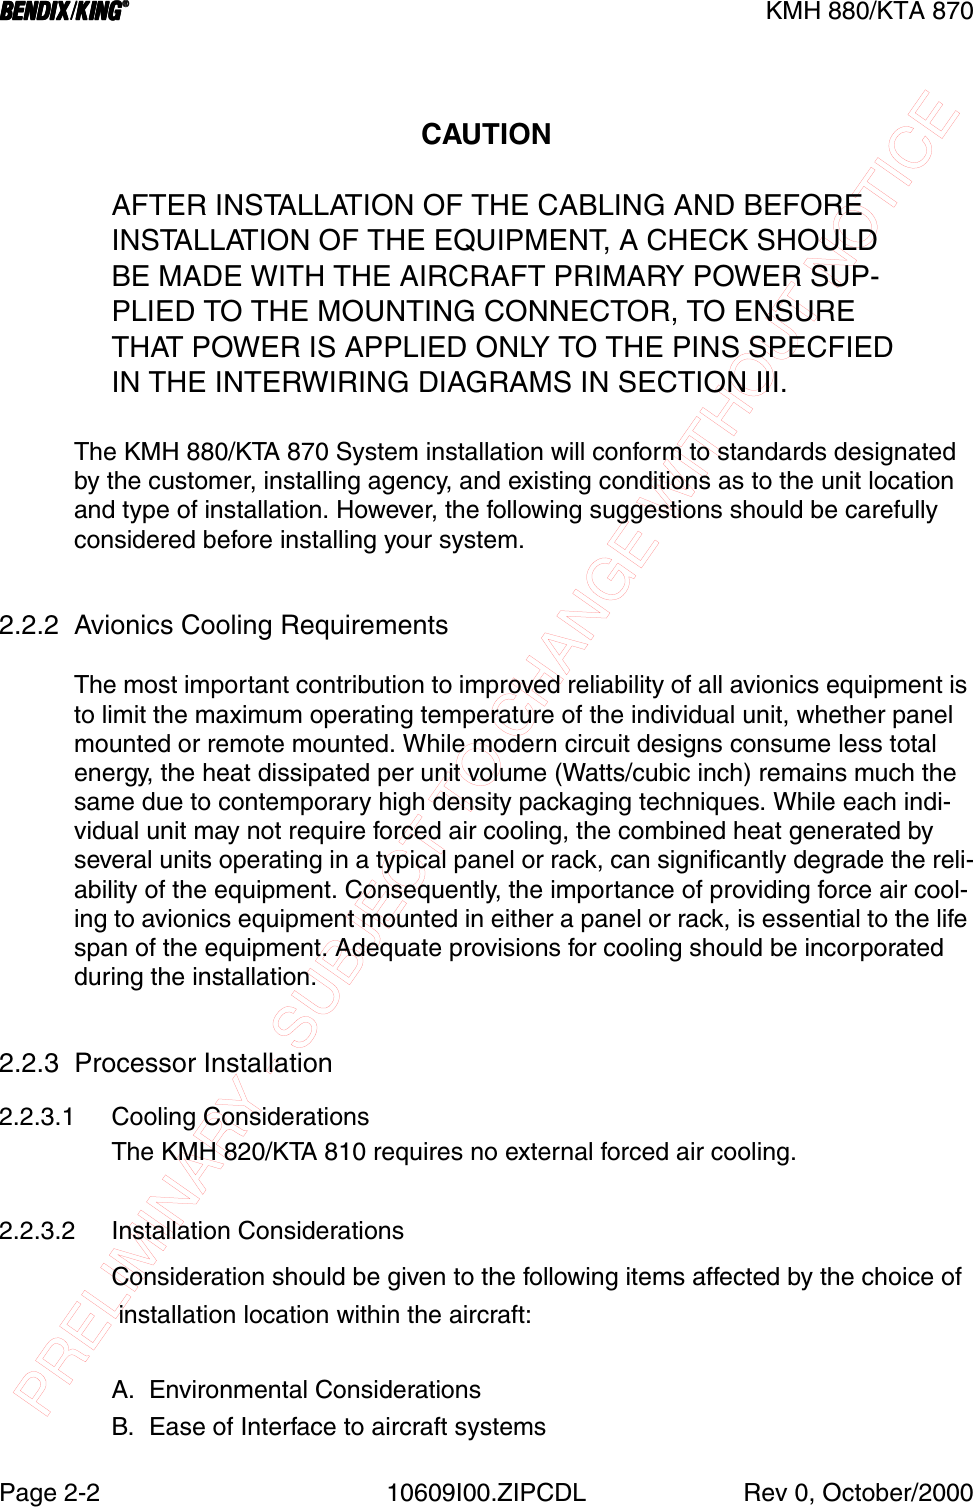 PRELIMINARY - SUBJECT TO CHANGE WITHOUT NOTICEBBBBKMH 880/KTA 870Page 2-2 10609I00.ZIPCDL Rev 0, October/2000CAUTIONAFTER INSTALLATION OF THE CABLING AND BEFOREINSTALLATION OF THE EQUIPMENT, A CHECK SHOULDBE MADE WITH THE AIRCRAFT PRIMARY POWER SUP-PLIED TO THE MOUNTING CONNECTOR, TO ENSURETHAT POWER IS APPLIED ONLY TO THE PINS SPECFIEDIN THE INTERWIRING DIAGRAMS IN SECTION III.The KMH 880/KTA 870 System installation will conform to standards designated by the customer, installing agency, and existing conditions as to the unit location and type of installation. However, the following suggestions should be carefully considered before installing your system.2.2.2 Avionics Cooling Requirements The most important contribution to improved reliability of all avionics equipment is to limit the maximum operating temperature of the individual unit, whether panel mounted or remote mounted. While modern circuit designs consume less total energy, the heat dissipated per unit volume (Watts/cubic inch) remains much the same due to contemporary high density packaging techniques. While each indi-vidual unit may not require forced air cooling, the combined heat generated by several units operating in a typical panel or rack, can significantly degrade the reli-ability of the equipment. Consequently, the importance of providing force air cool-ing to avionics equipment mounted in either a panel or rack, is essential to the life span of the equipment. Adequate provisions for cooling should be incorporated during the installation.2.2.3  Processor Installation2.2.3.1 Cooling ConsiderationsThe KMH 820/KTA 810 requires no external forced air cooling.2.2.3.2 Installation ConsiderationsConsideration should be given to the following items affected by the choice of installation location within the aircraft:A. Environmental ConsiderationsB. Ease of Interface to aircraft systems